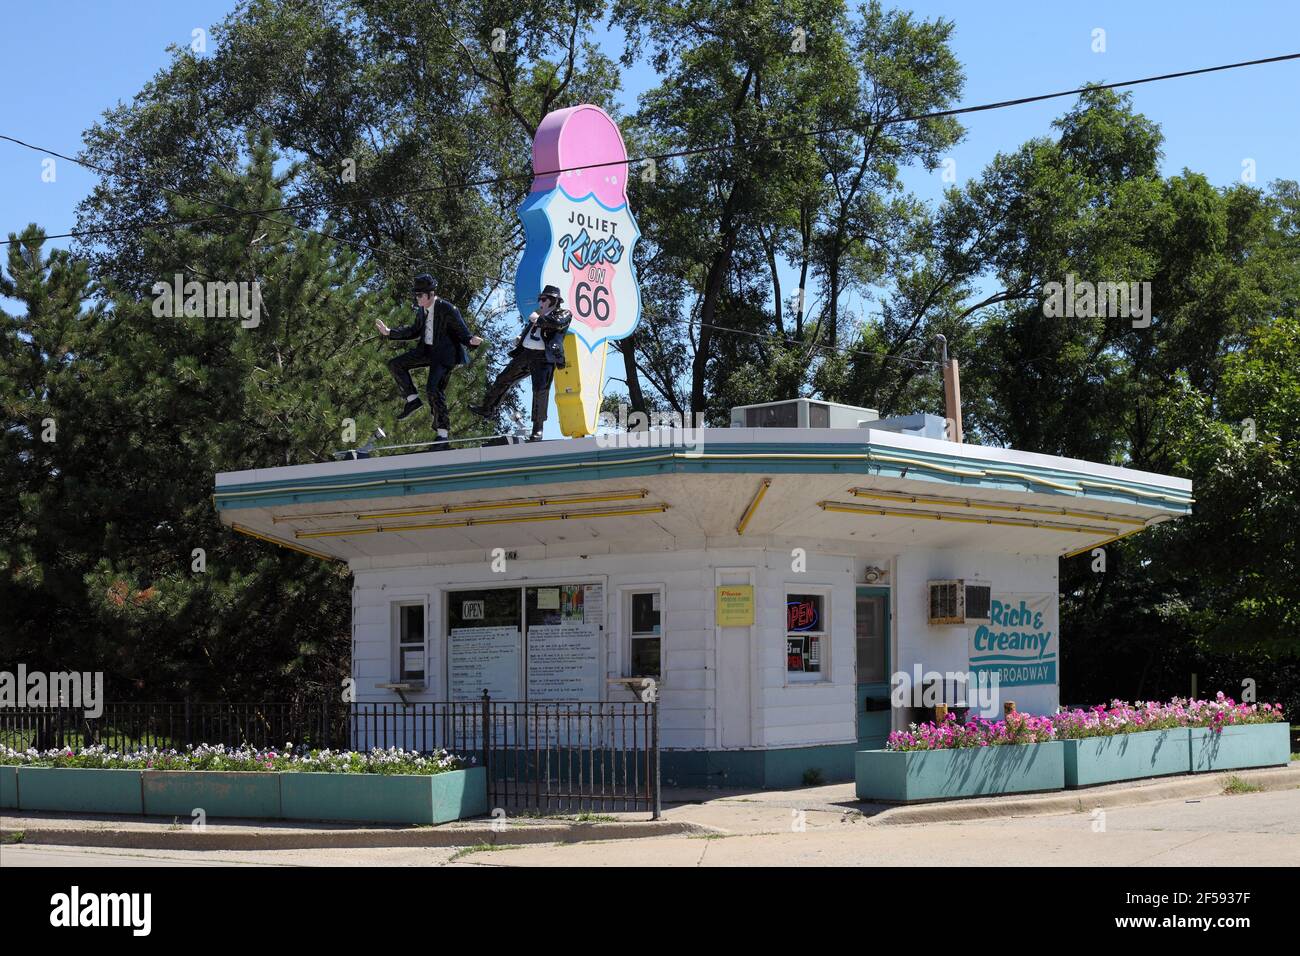 Geographie / Reisen, USA, Illinois, Joliet, Rich & Creamy Eisstand, Route 66 Park, Broadway, Additional-Rights-Clearance-Info-not-available Stockfoto